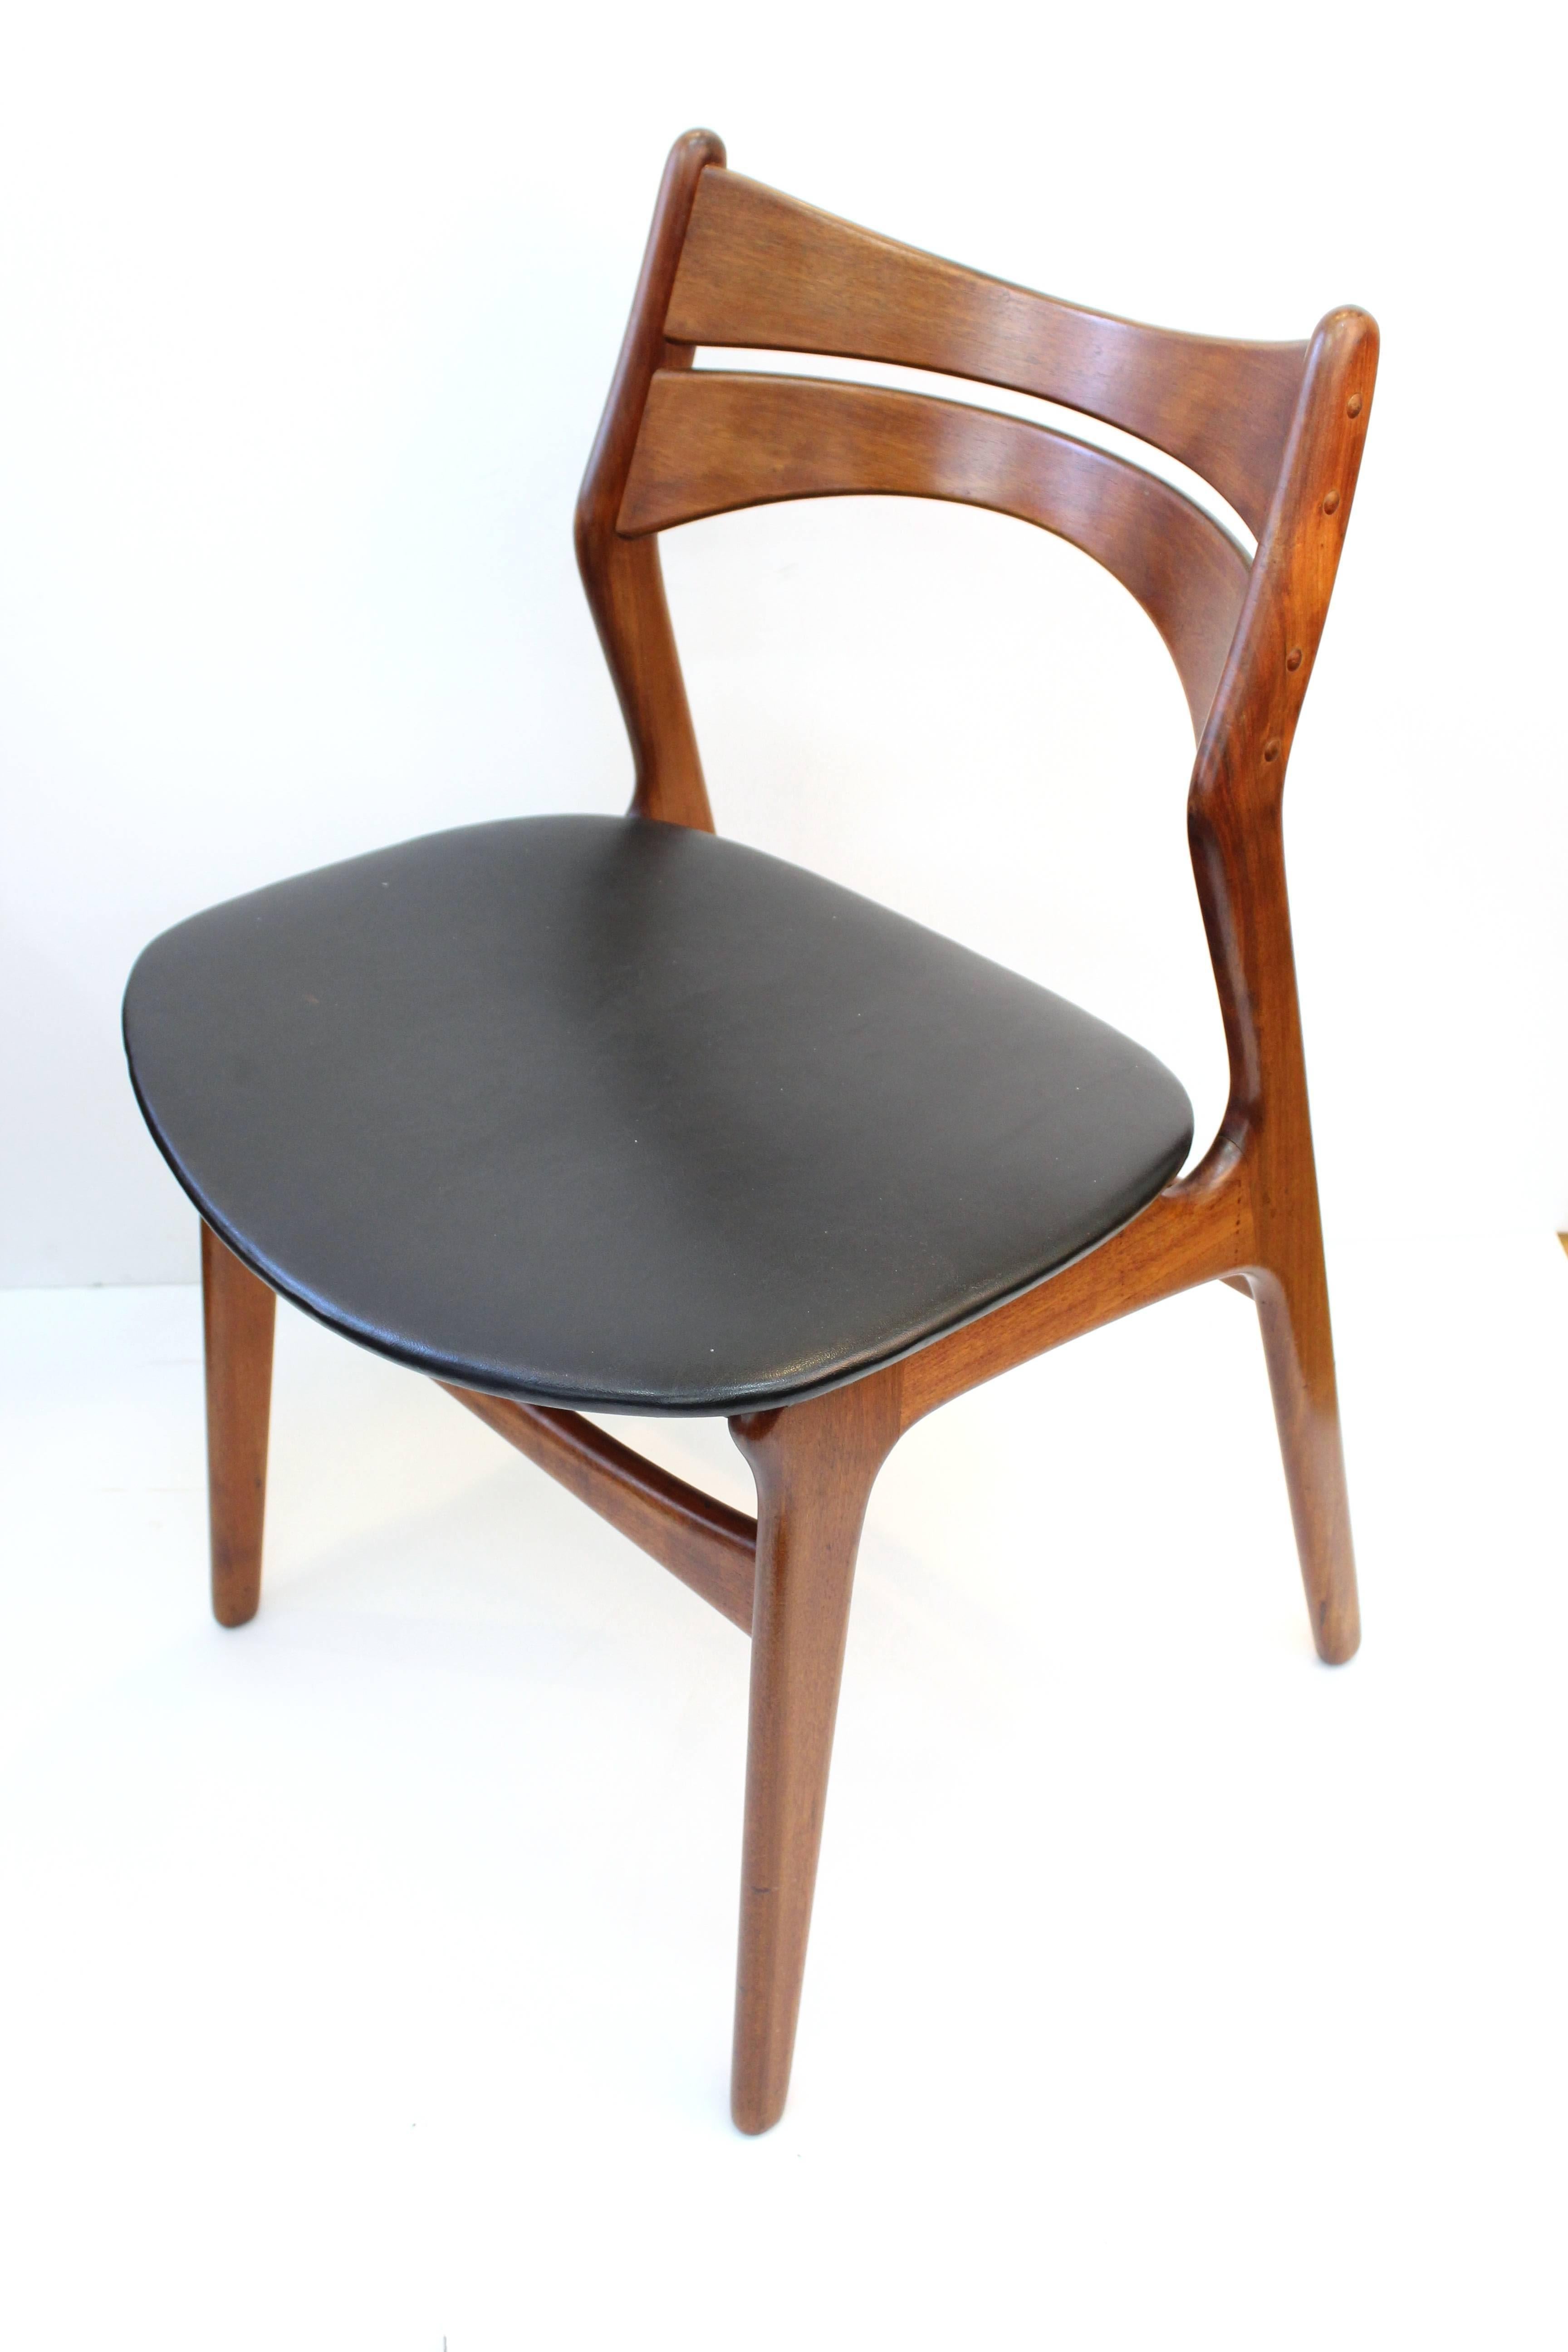 Set of dining chairs designed by Erik Buck for Chr. Christiansen in the 1950s. Includes six dining chairs, two with arms and a makers mark on the bottom. The chairs have some wear appropriate to age and use but are in overall good condition.